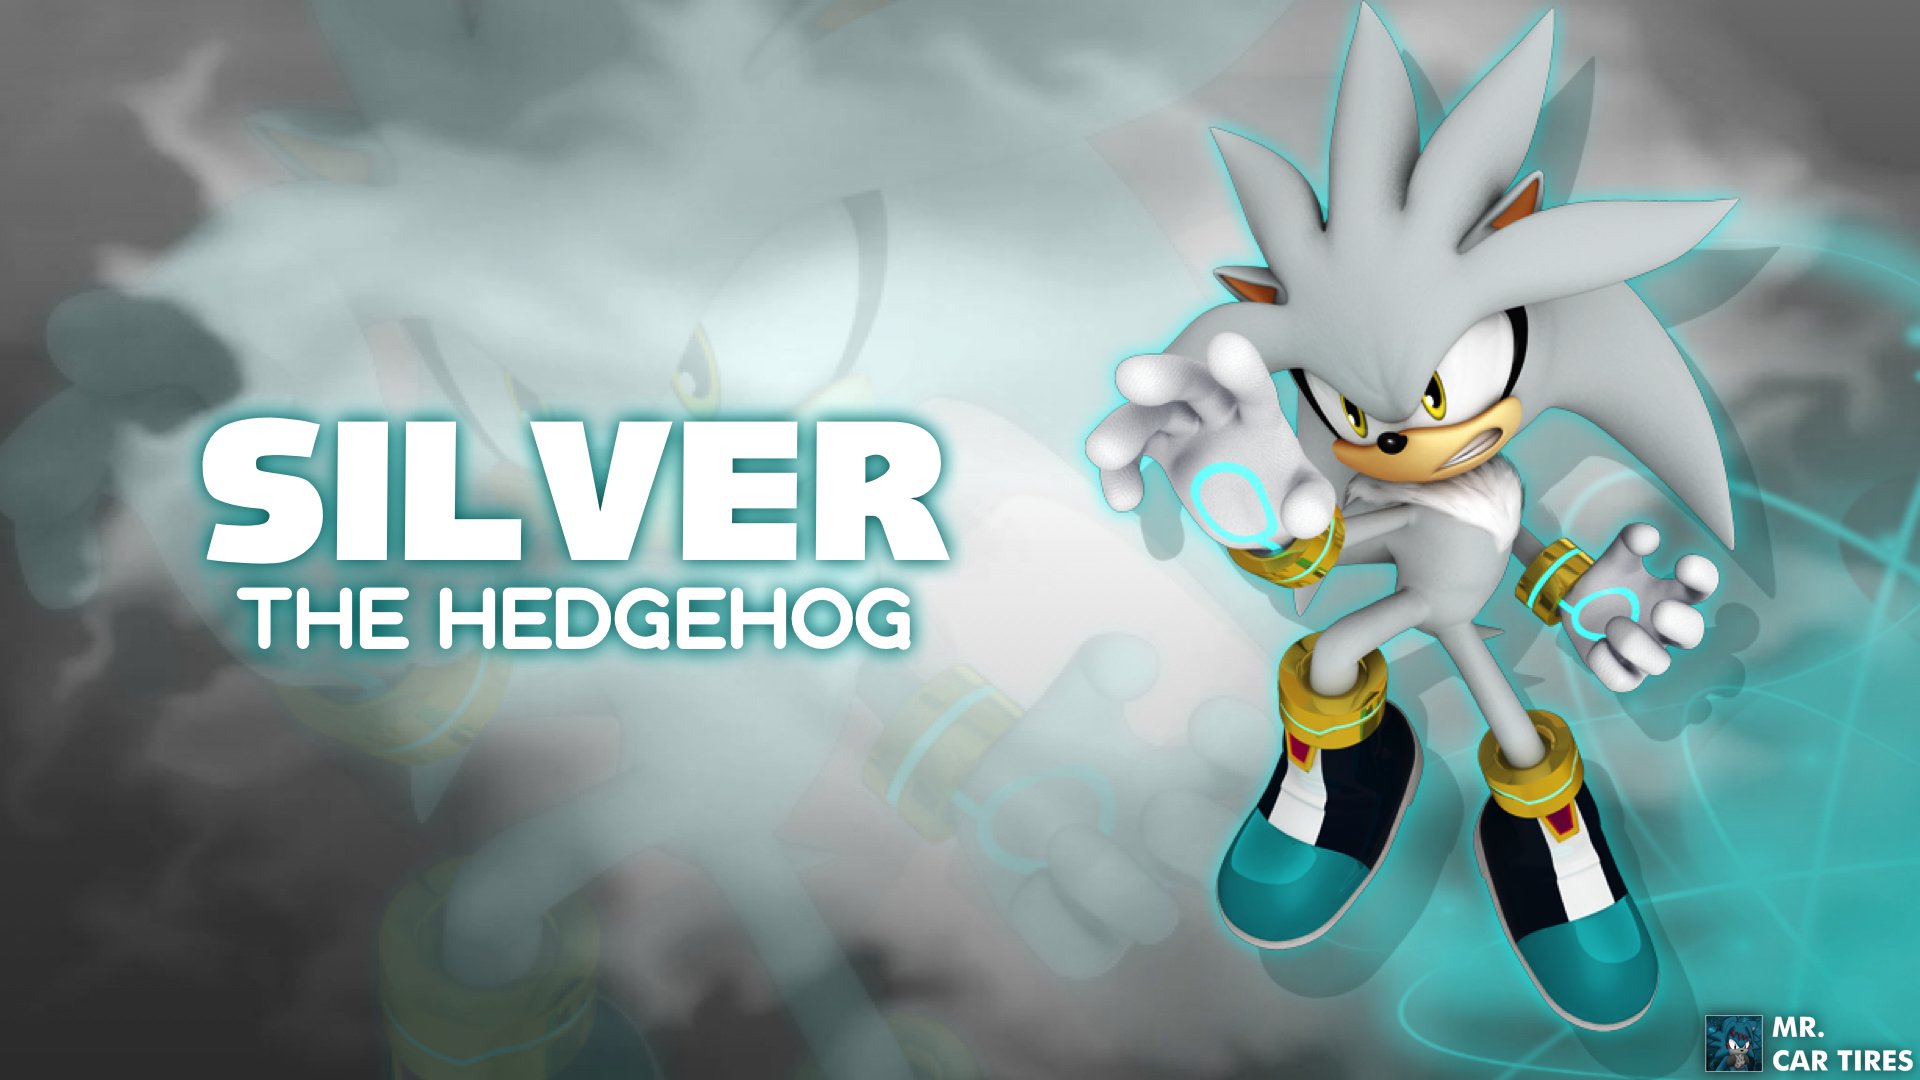 silver the hedgehog wallpaper by mrcartires